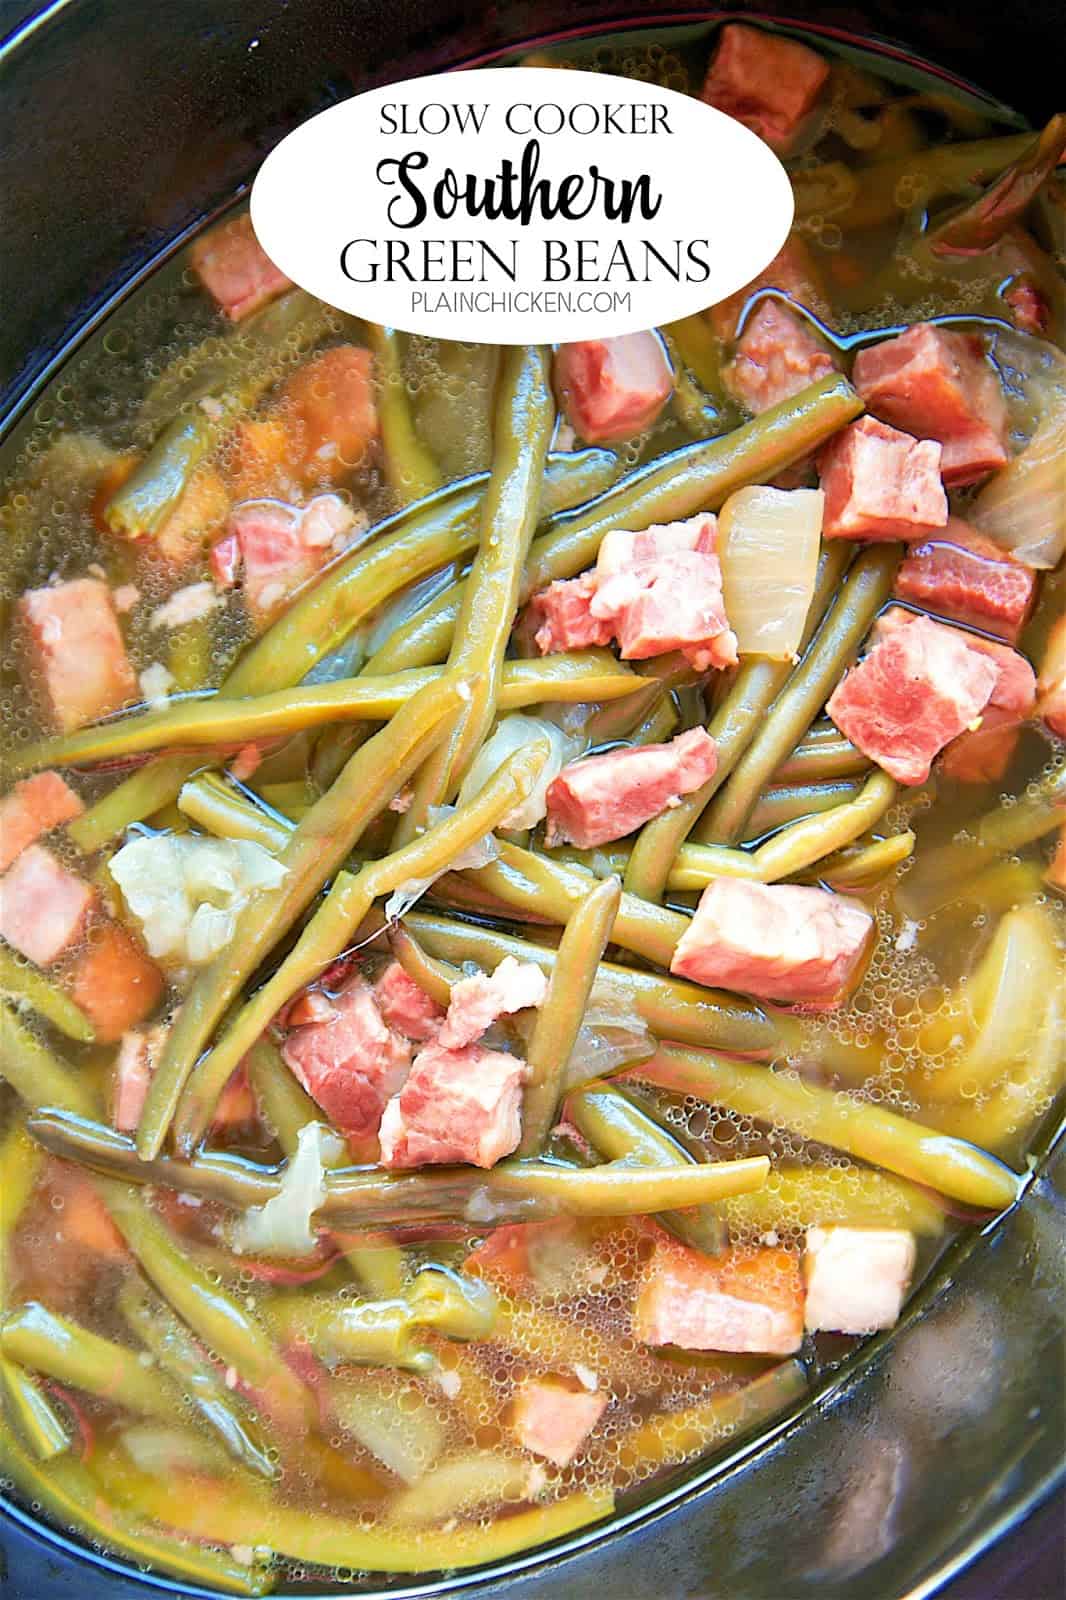 Slow Cooker Southern Green Beans - THE BEST green beans EVER! Only 5 ingredients - fresh green beans, ham, onion, cider vinegar, chicken broth. Dump everything in the slow cooker at it does all the work. Great for holiday meals! We make these all the time!!